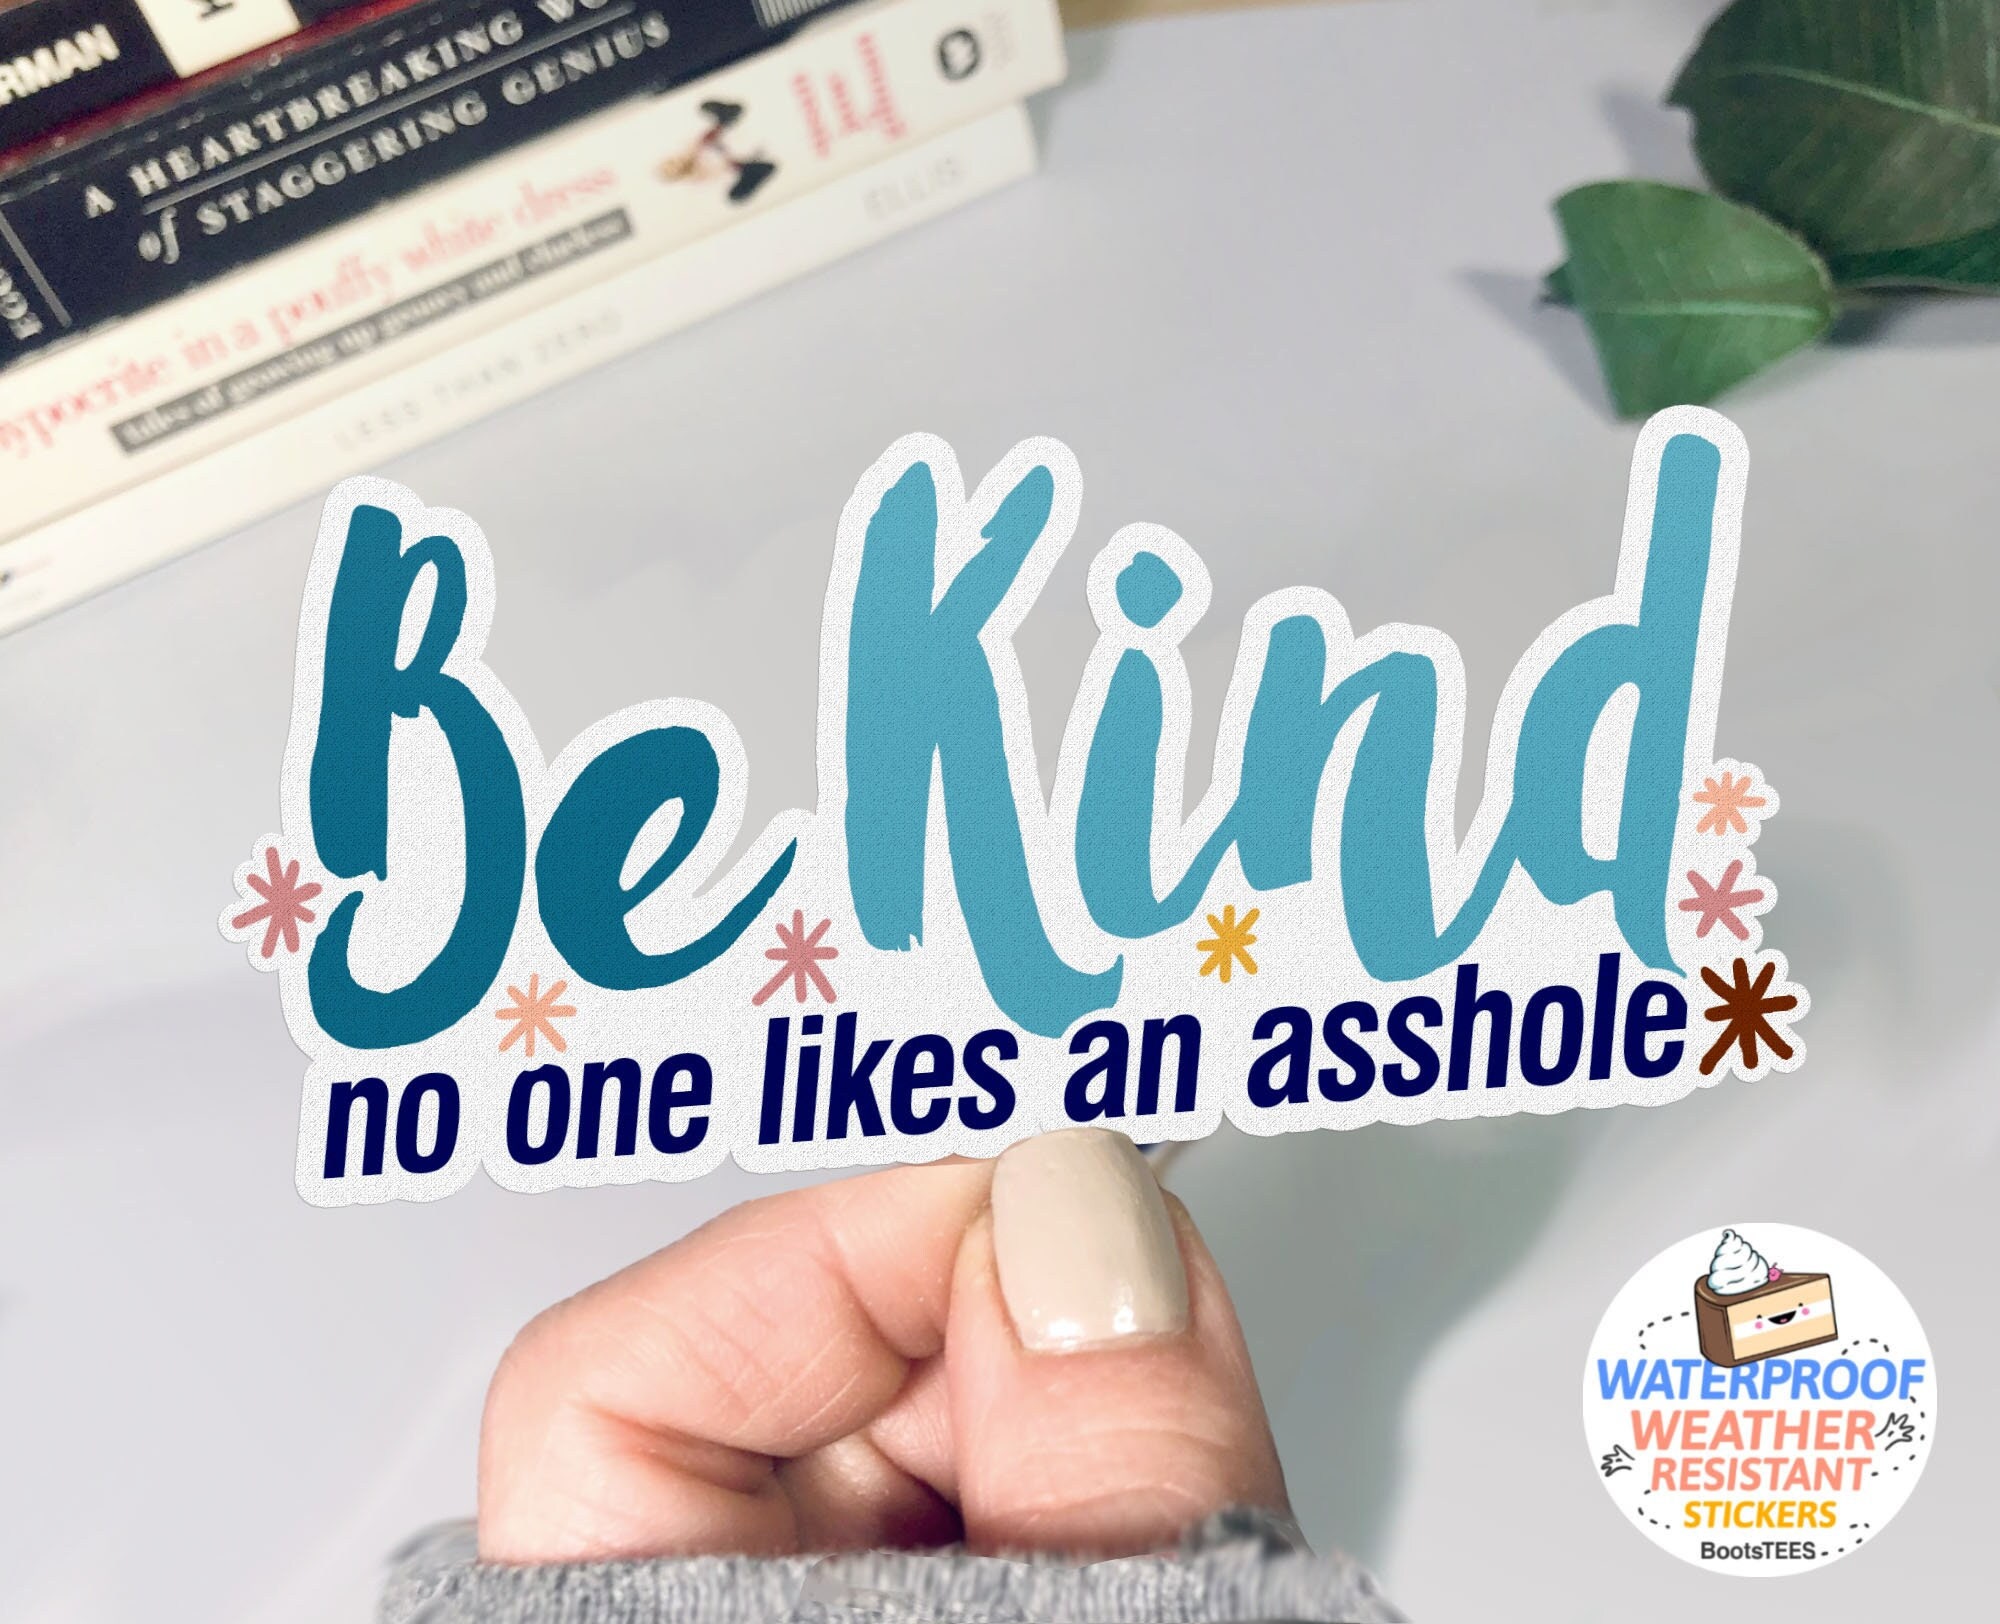 Kindness Matters Sticker, Die Cut Label, Girly Stickers, Computer Decals, Kindness  Stickers, Rainbow Label, Bumper Stickers, Car Decal 